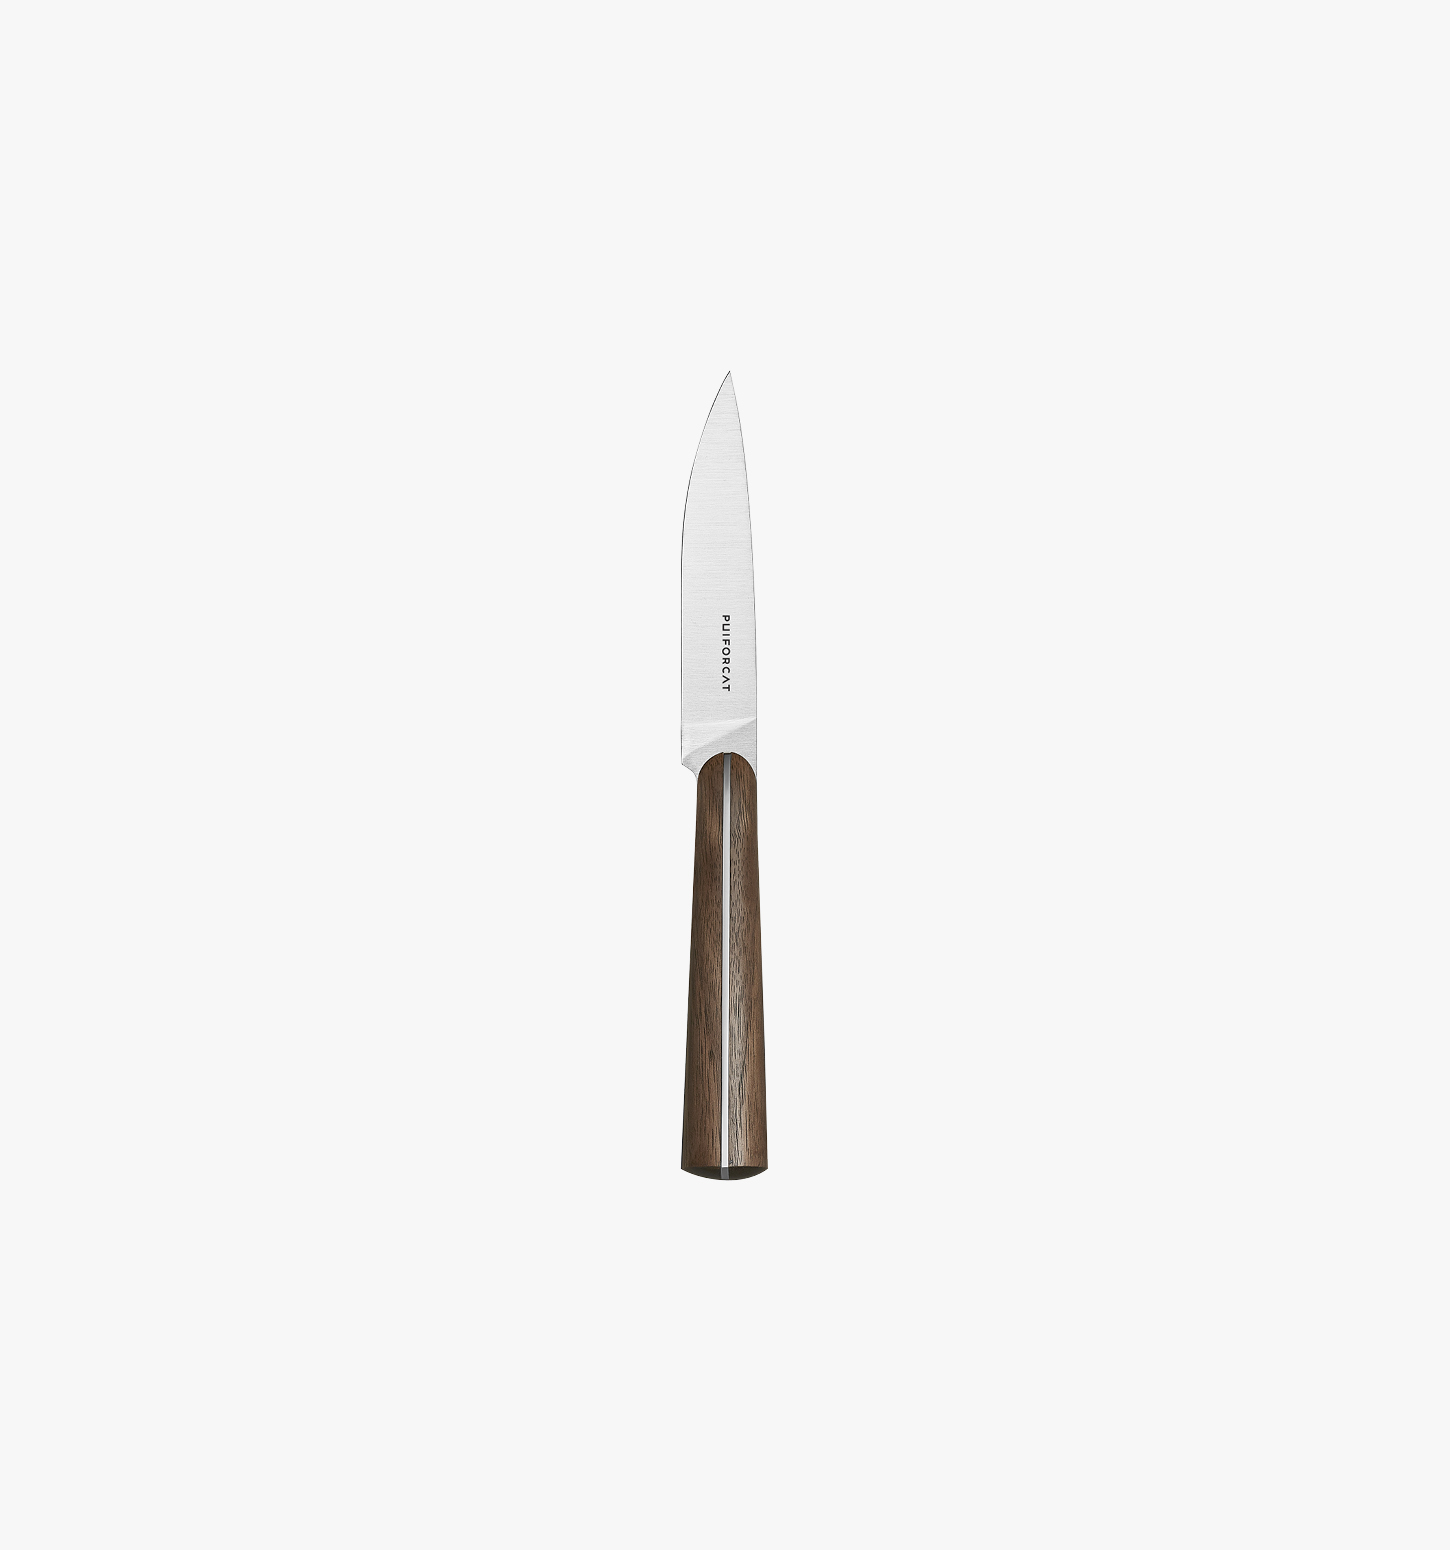 Office knife from Couteaux d'orfèvre collection in sterling steel and wood